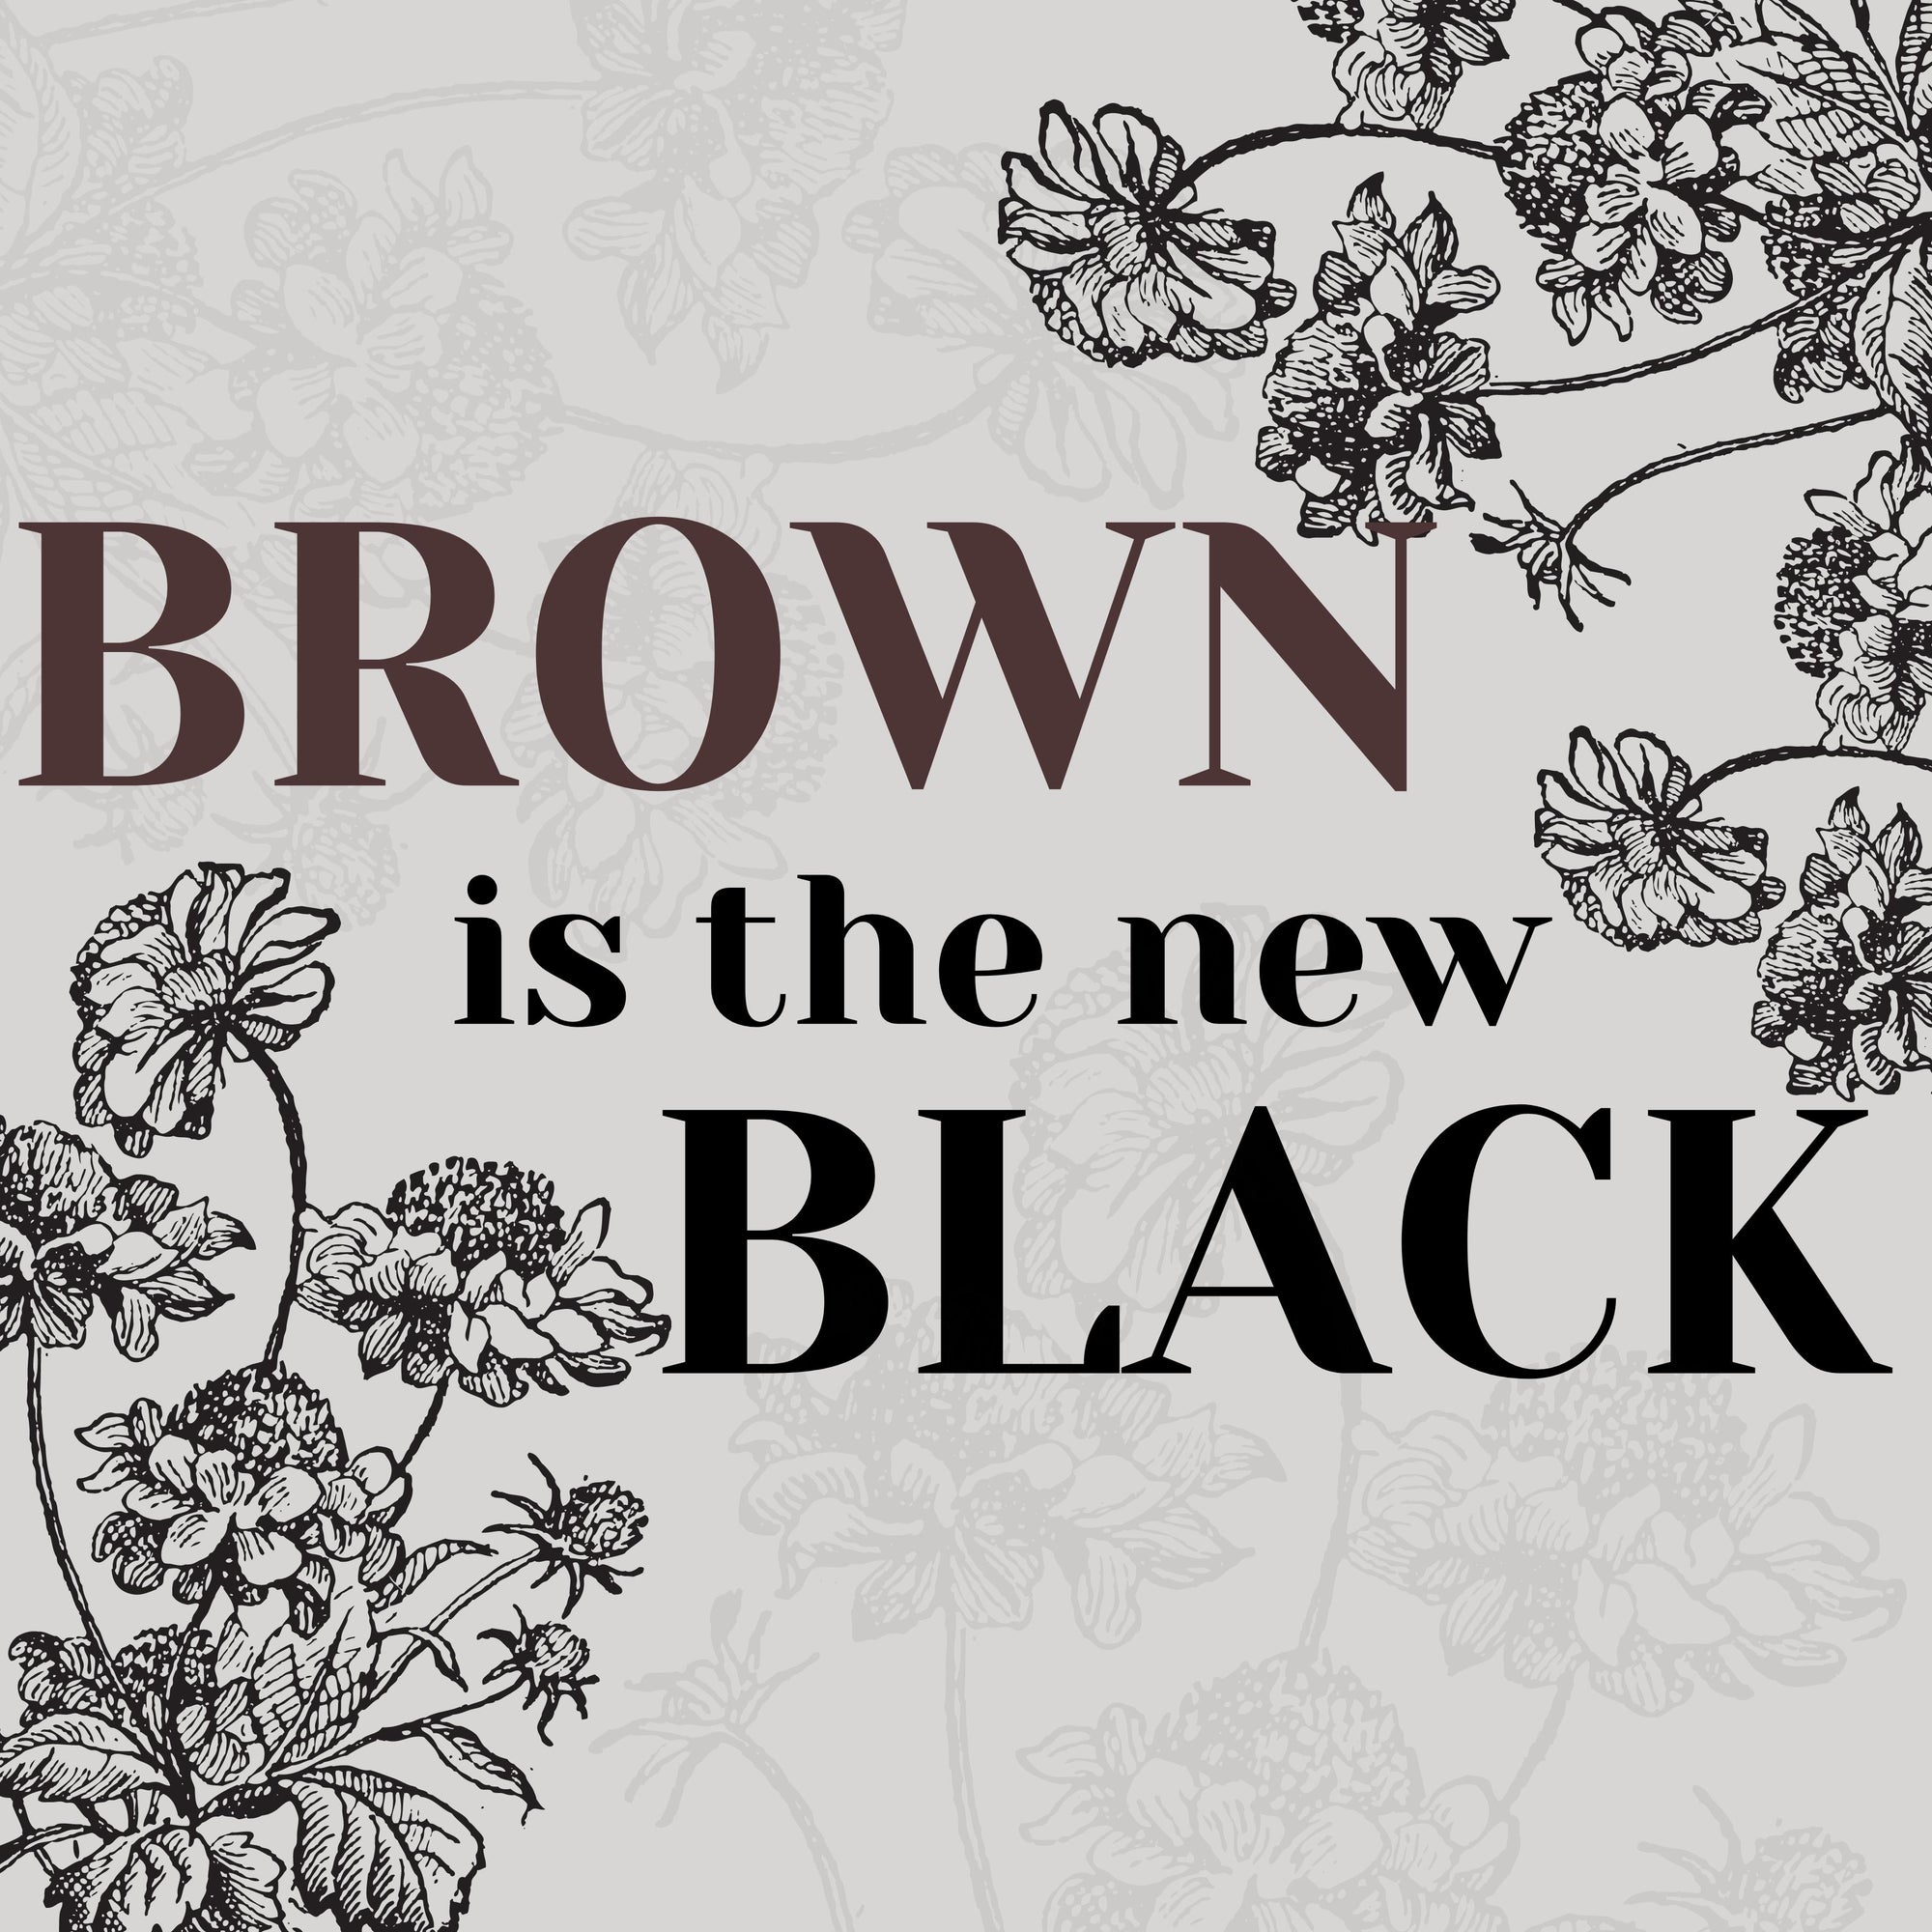 BROWN is the new BLACK